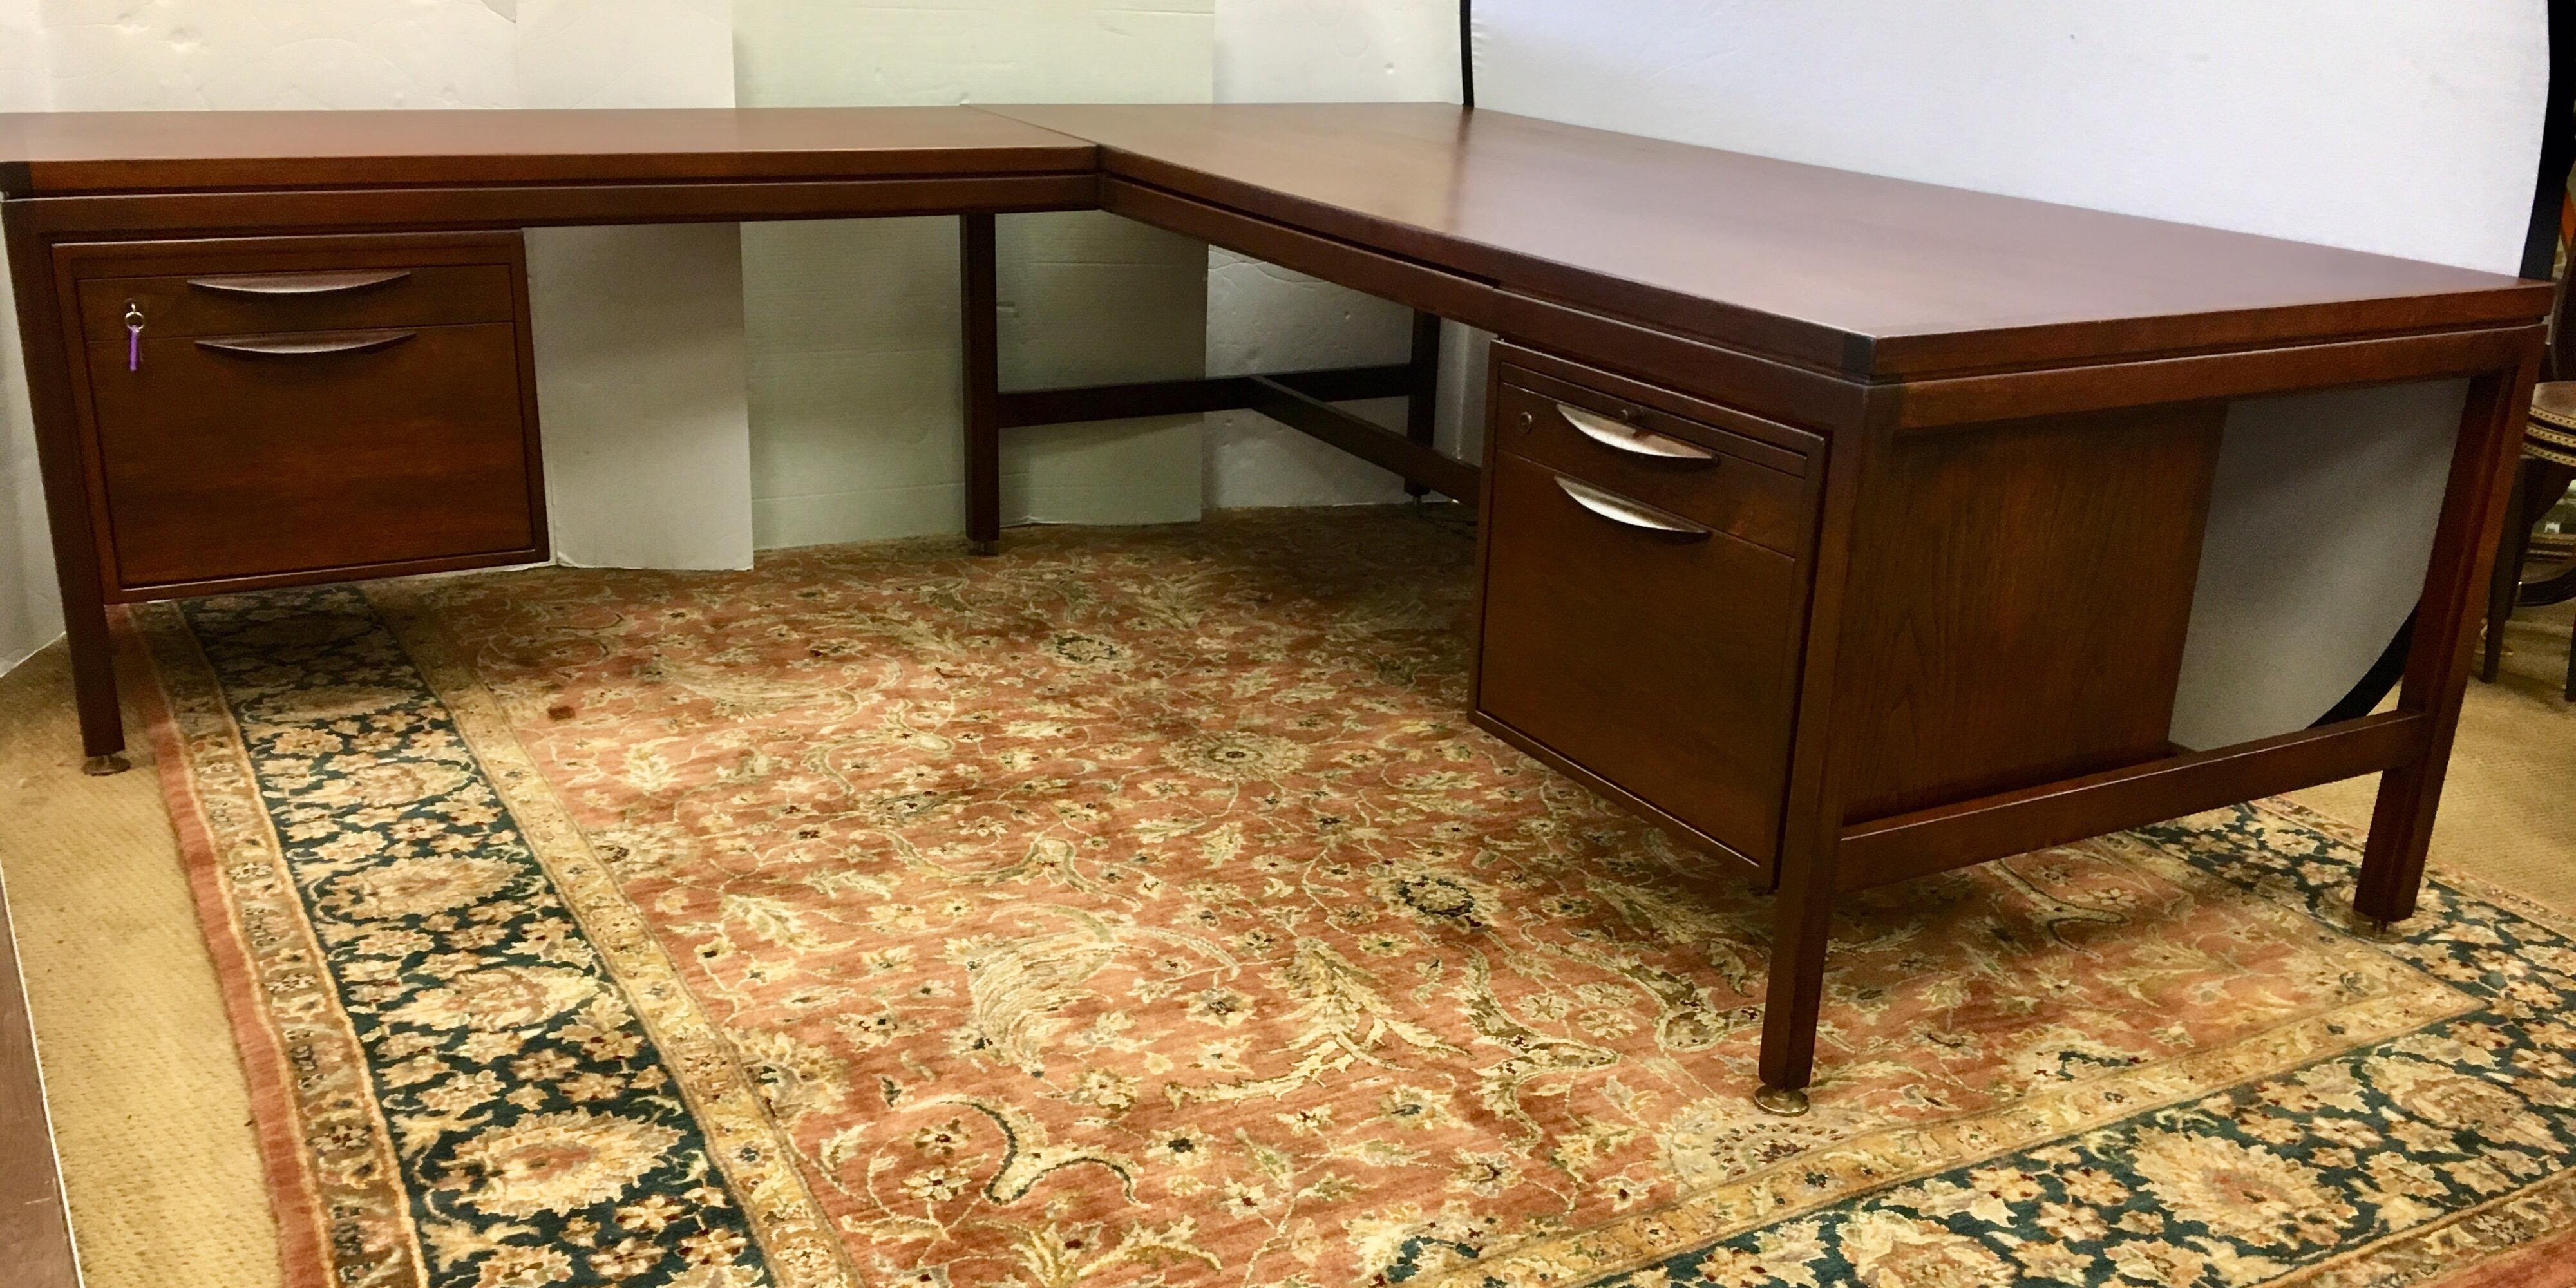 An exceptional Mid-Century Modern two piece walnut executive desk designed by Jens Risom. The desk features gorgeous walnut wood grain and sleek Minimalist design. It offers exceptional storage with multiple drawers including file drawers, a pencil